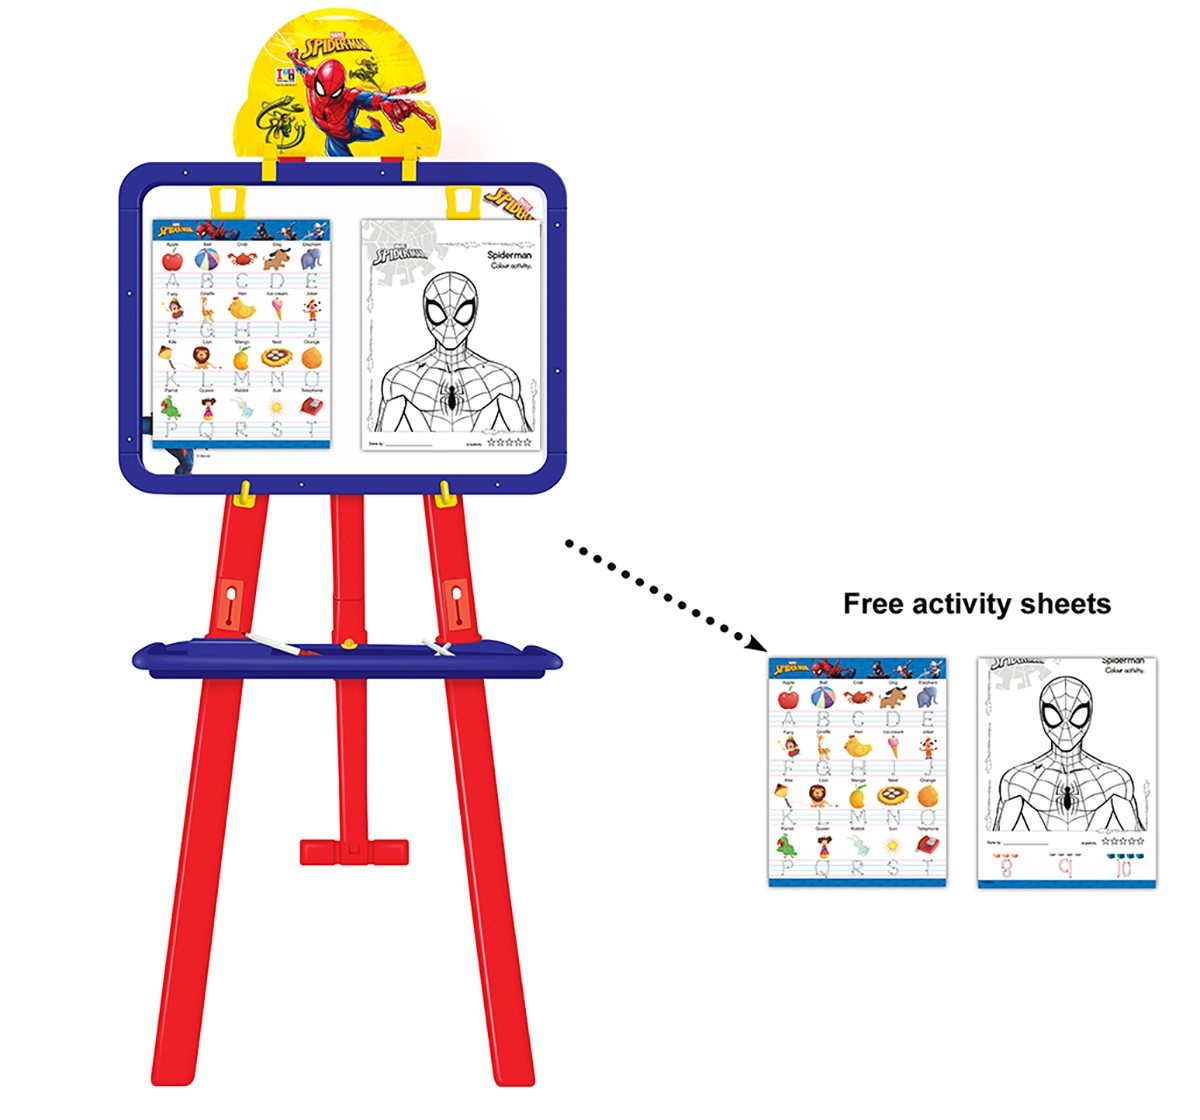 Marvel Spiderman 8 In 1 Easel Board Activity Set for Kids age 5Y+ 